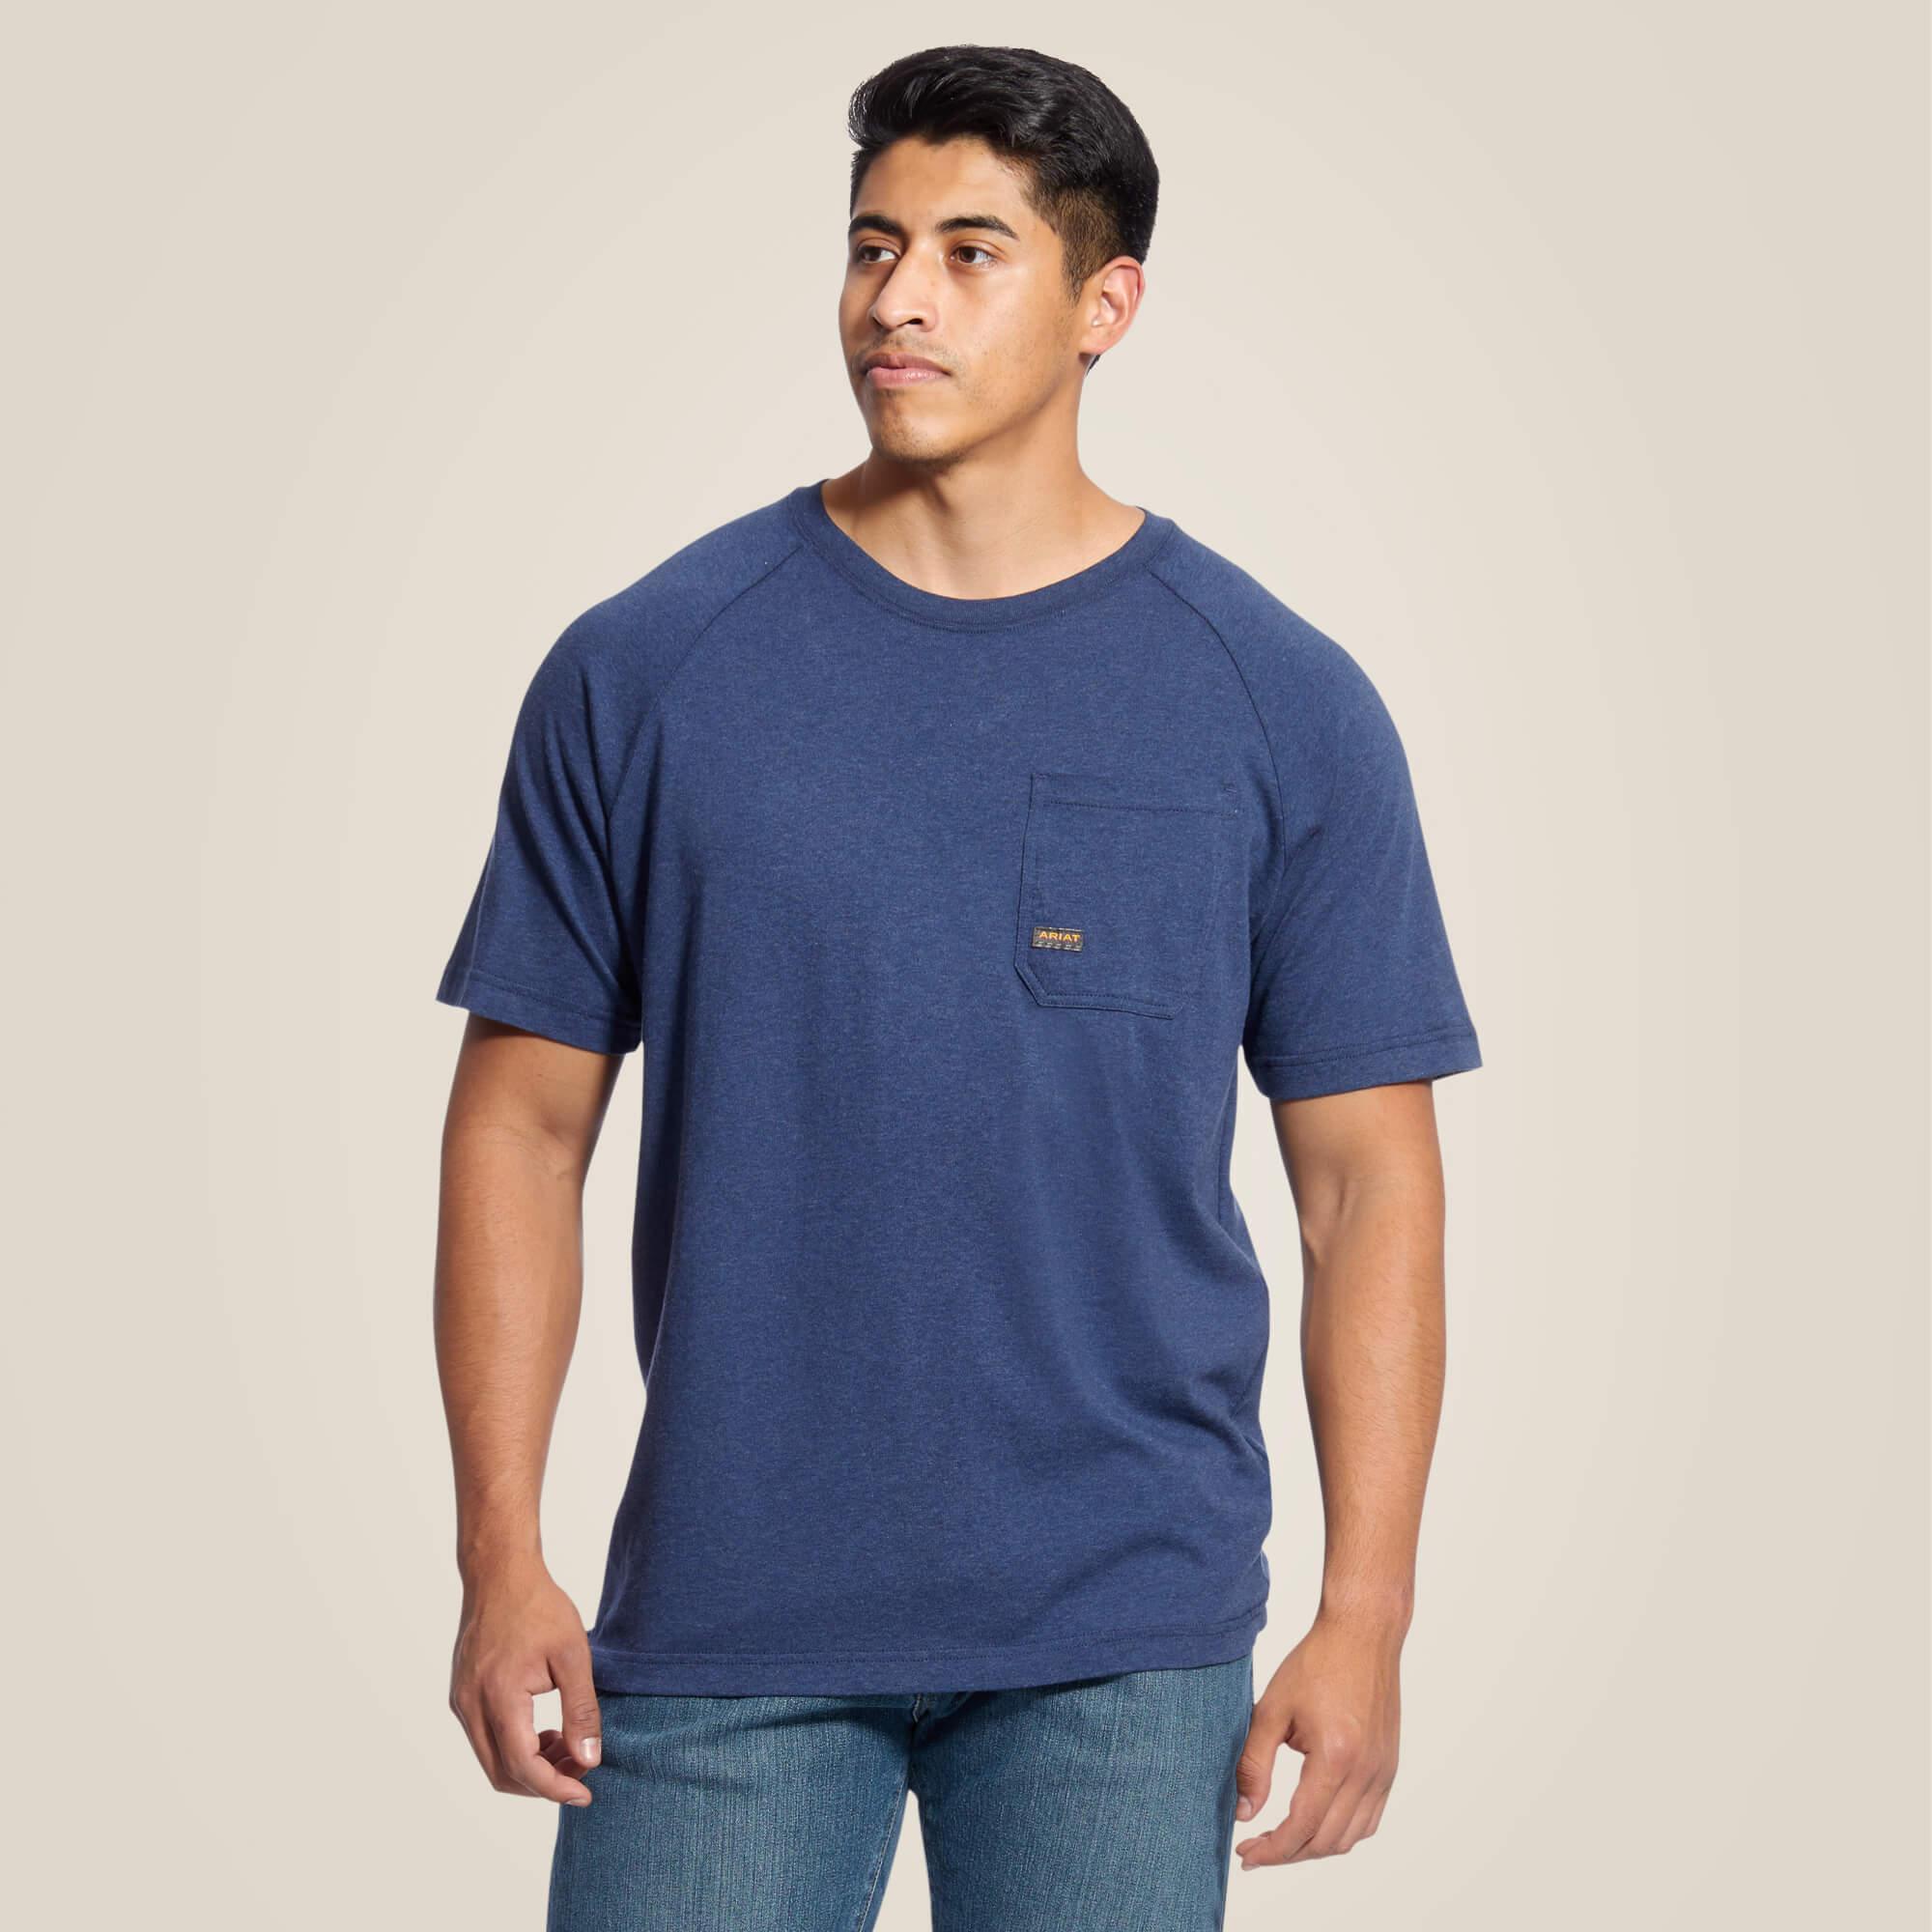 Rebar Cotton Strong T-Shirt - Navy Heather - Purpose-Built / Home of the Trades